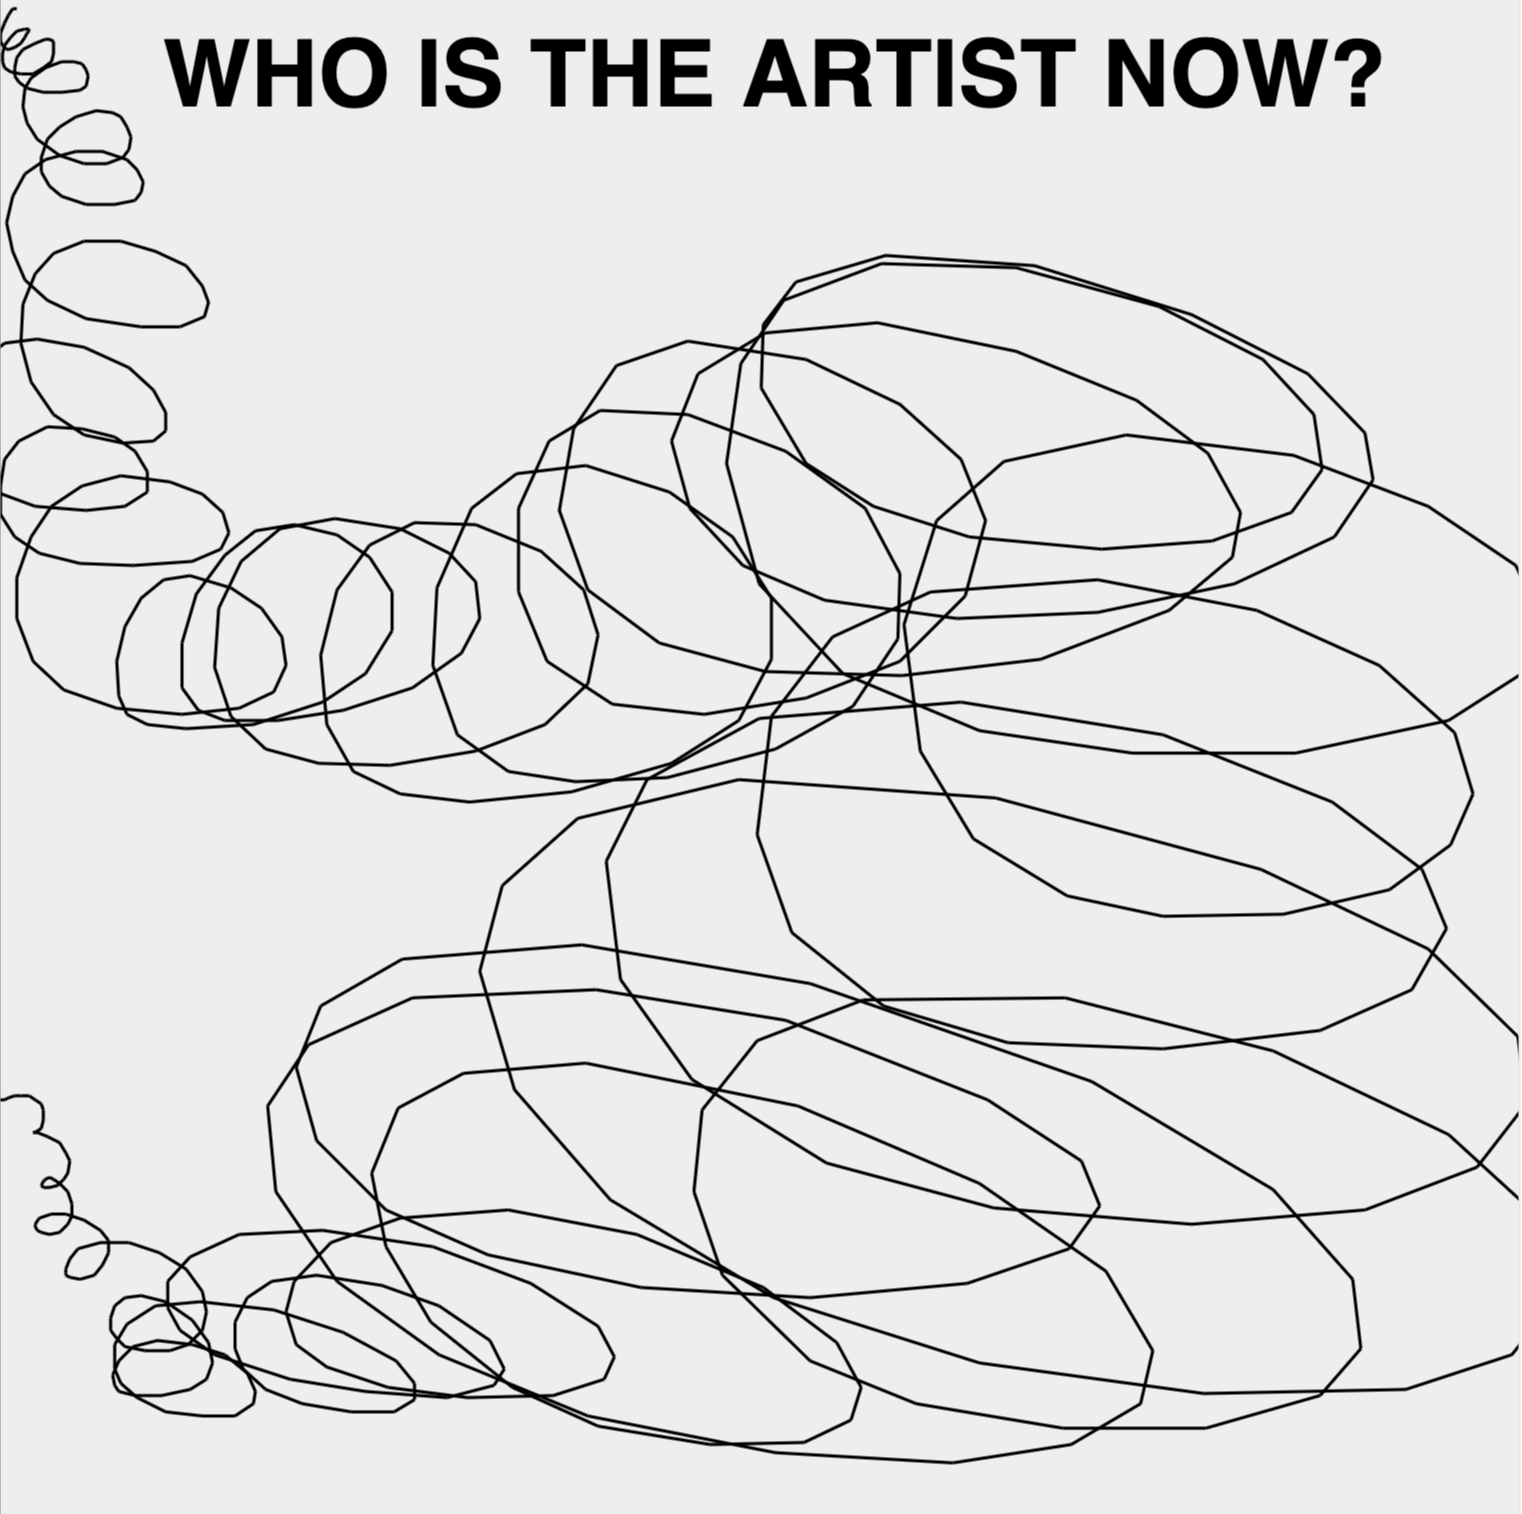 Drawing on WHO IS THE ARTIST NOW